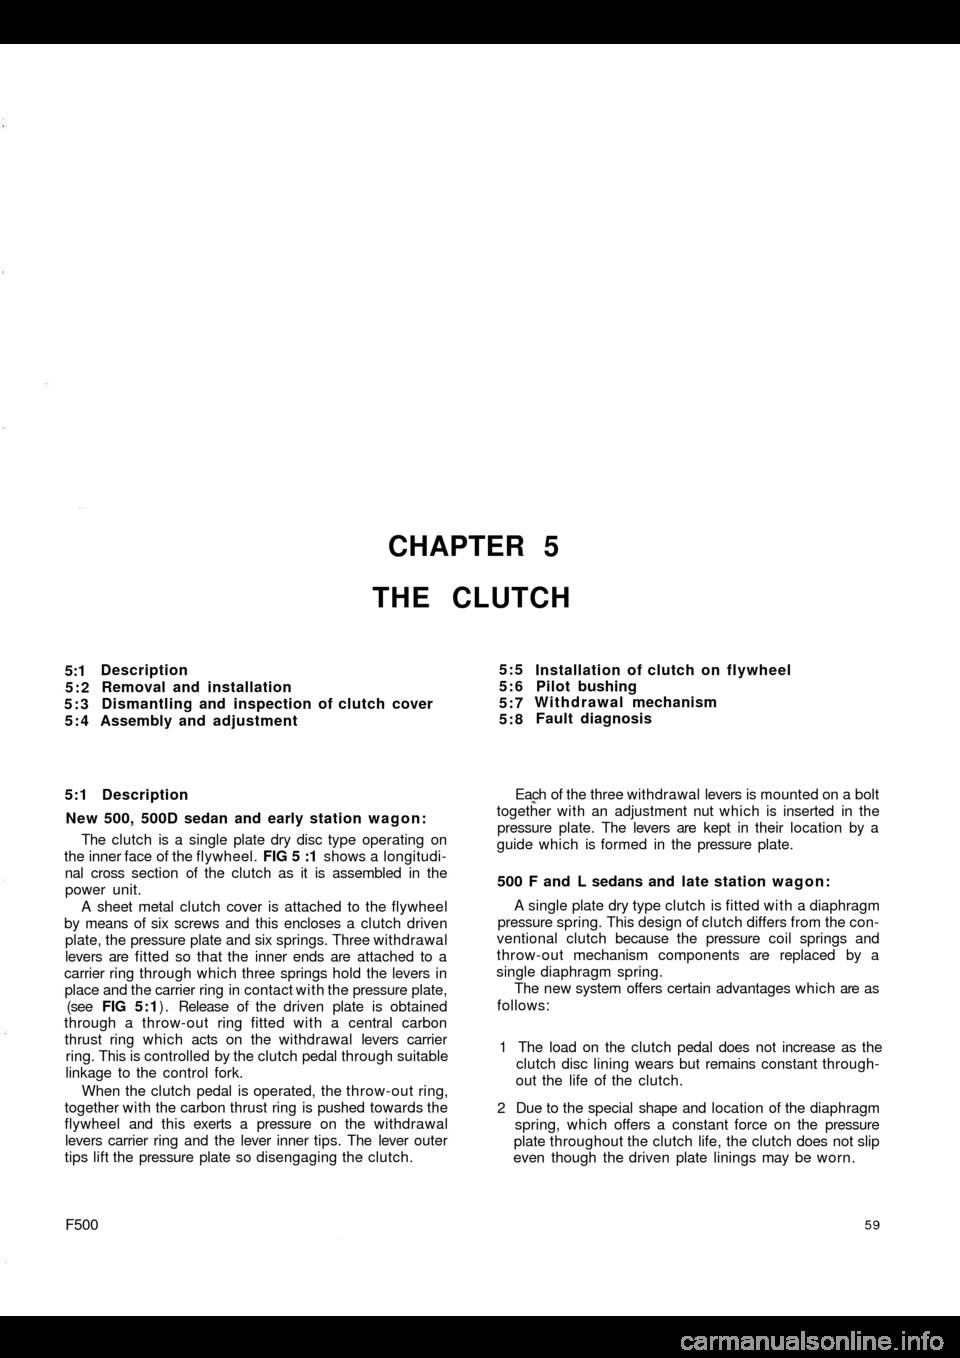 FIAT 500 1970 1.G Repair Manual CHAPTER 5
THE CLUTCH
5:1
5:2
5:3
5:4Description
Removal and installation
Dismantling and inspection of clutch cover
Assembly and adjustment
5:1 Description
New 500, 500D sedan and early station wagon: